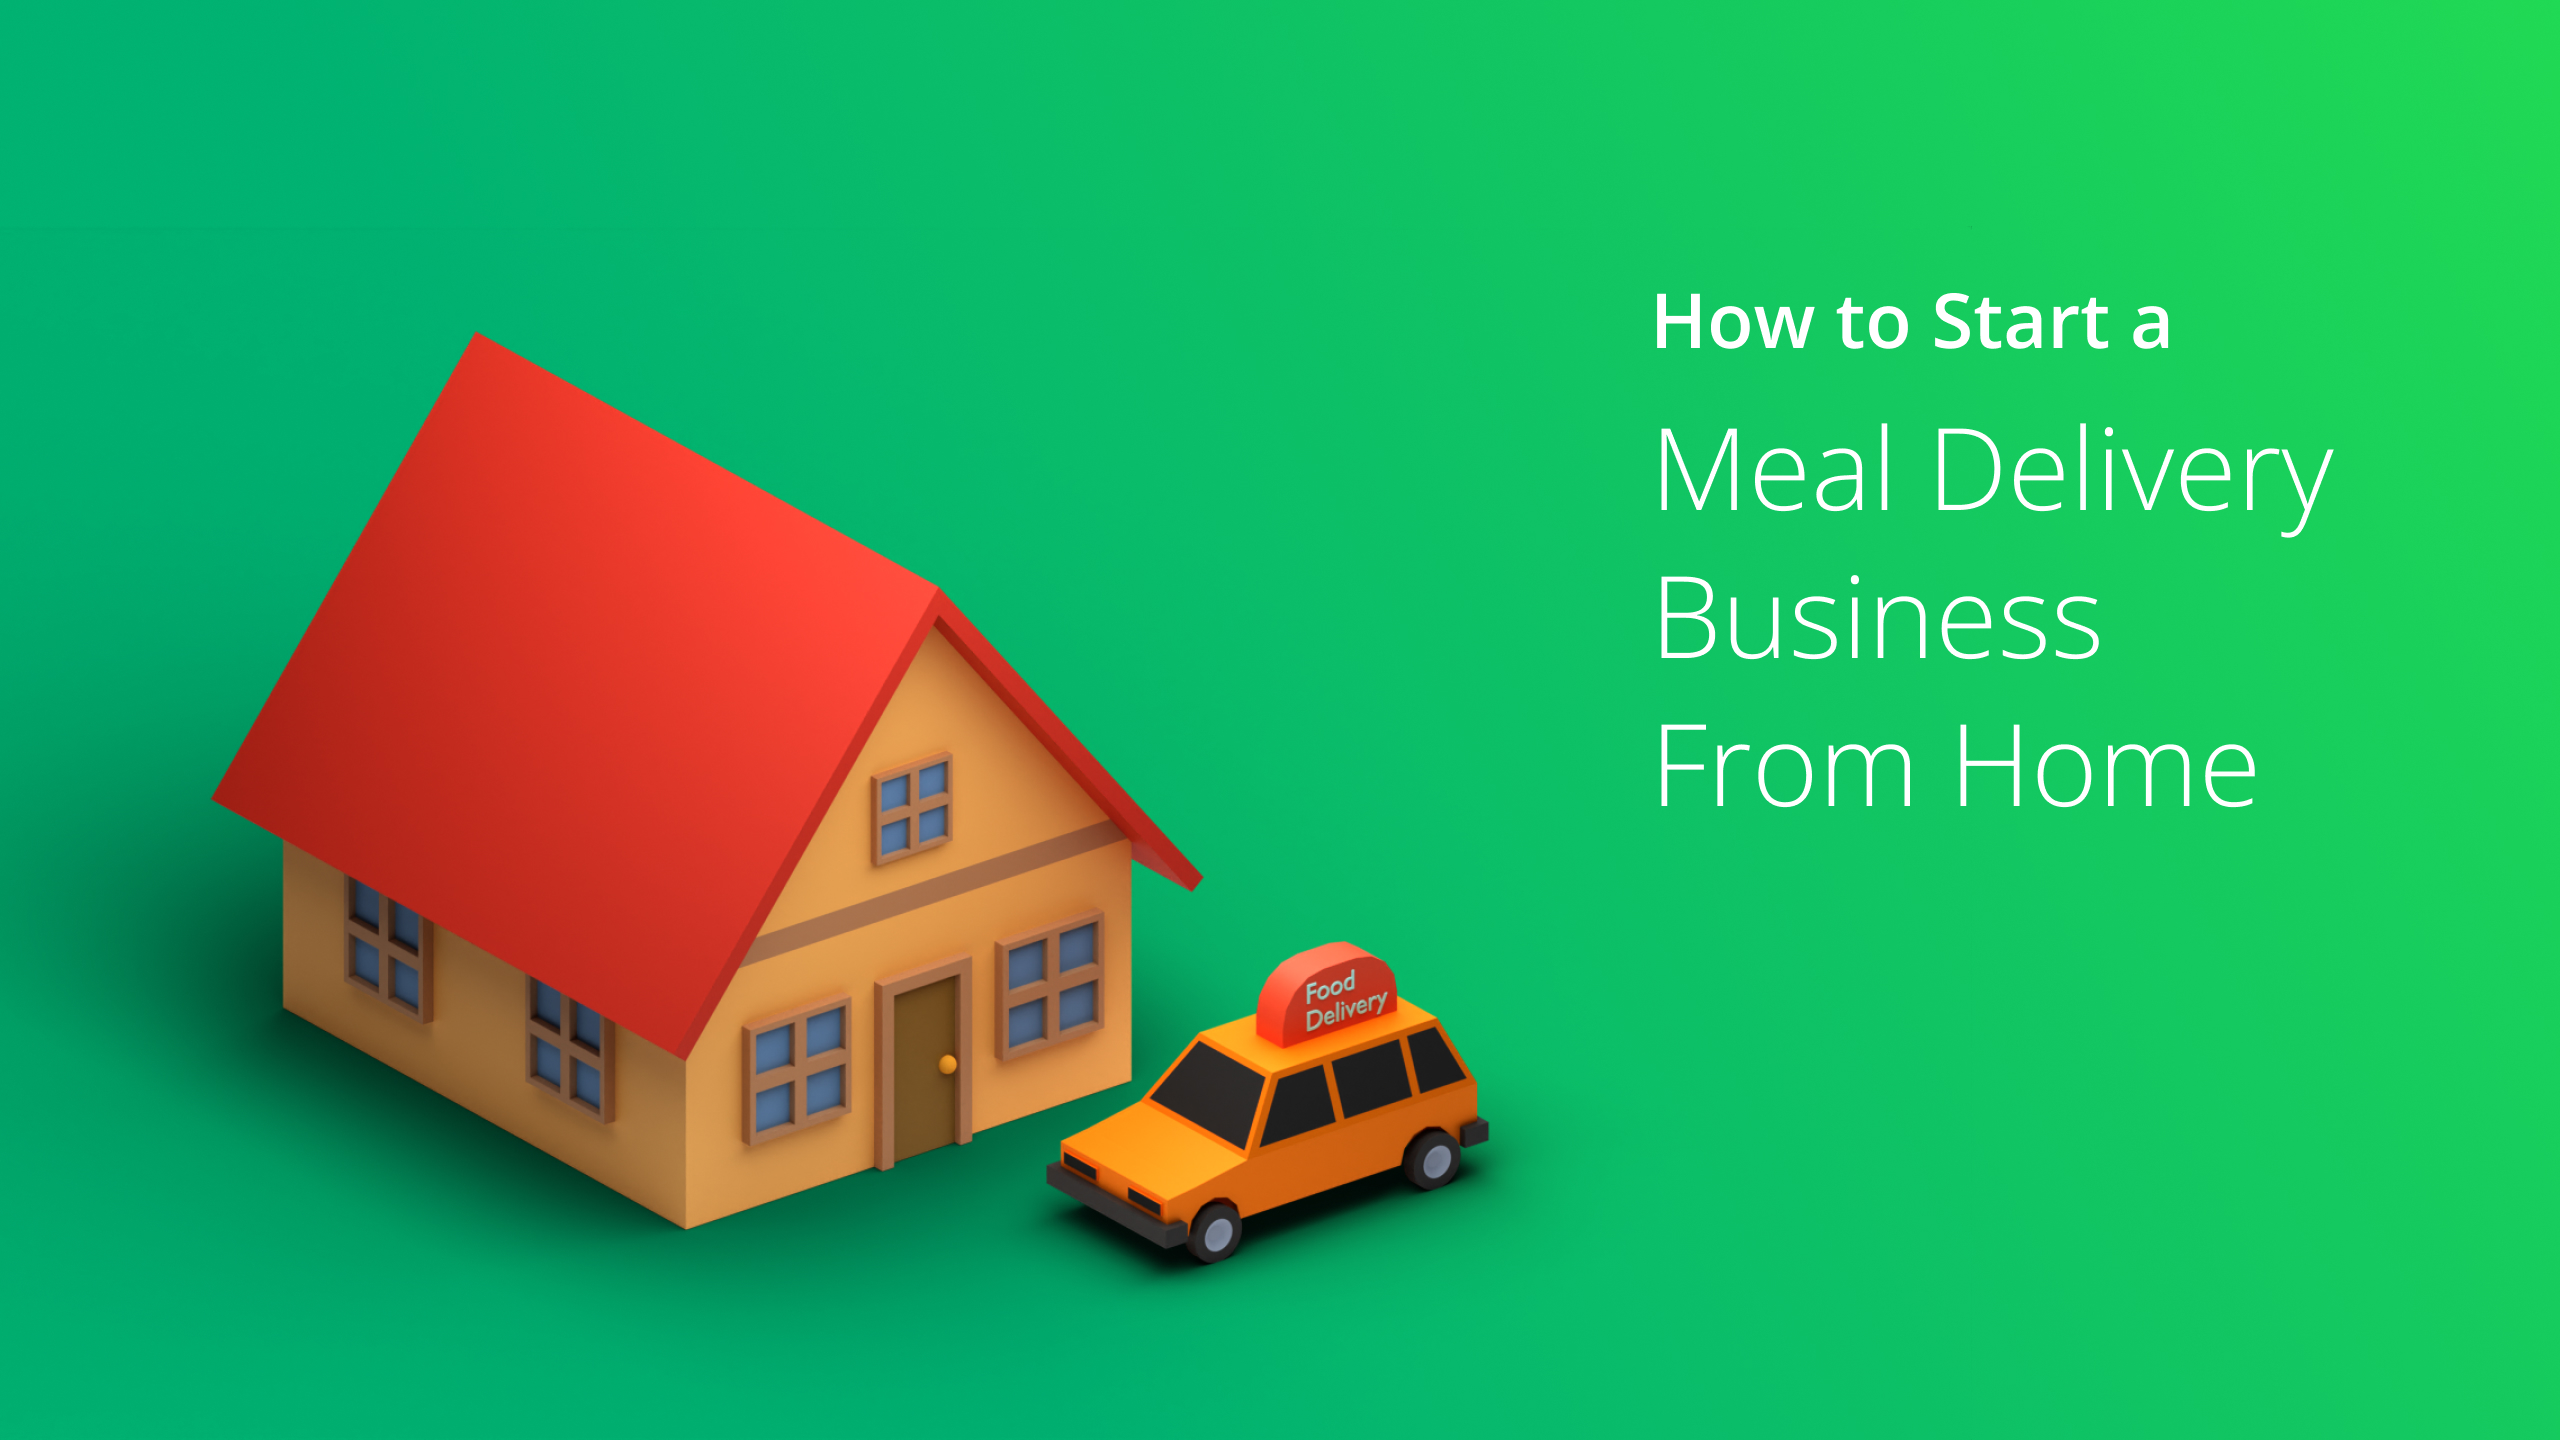 https://blog-cdn.route4me.com/2022/11/6c6c7165-how-to-start-a-meal-delivery-business-from-home.jpg